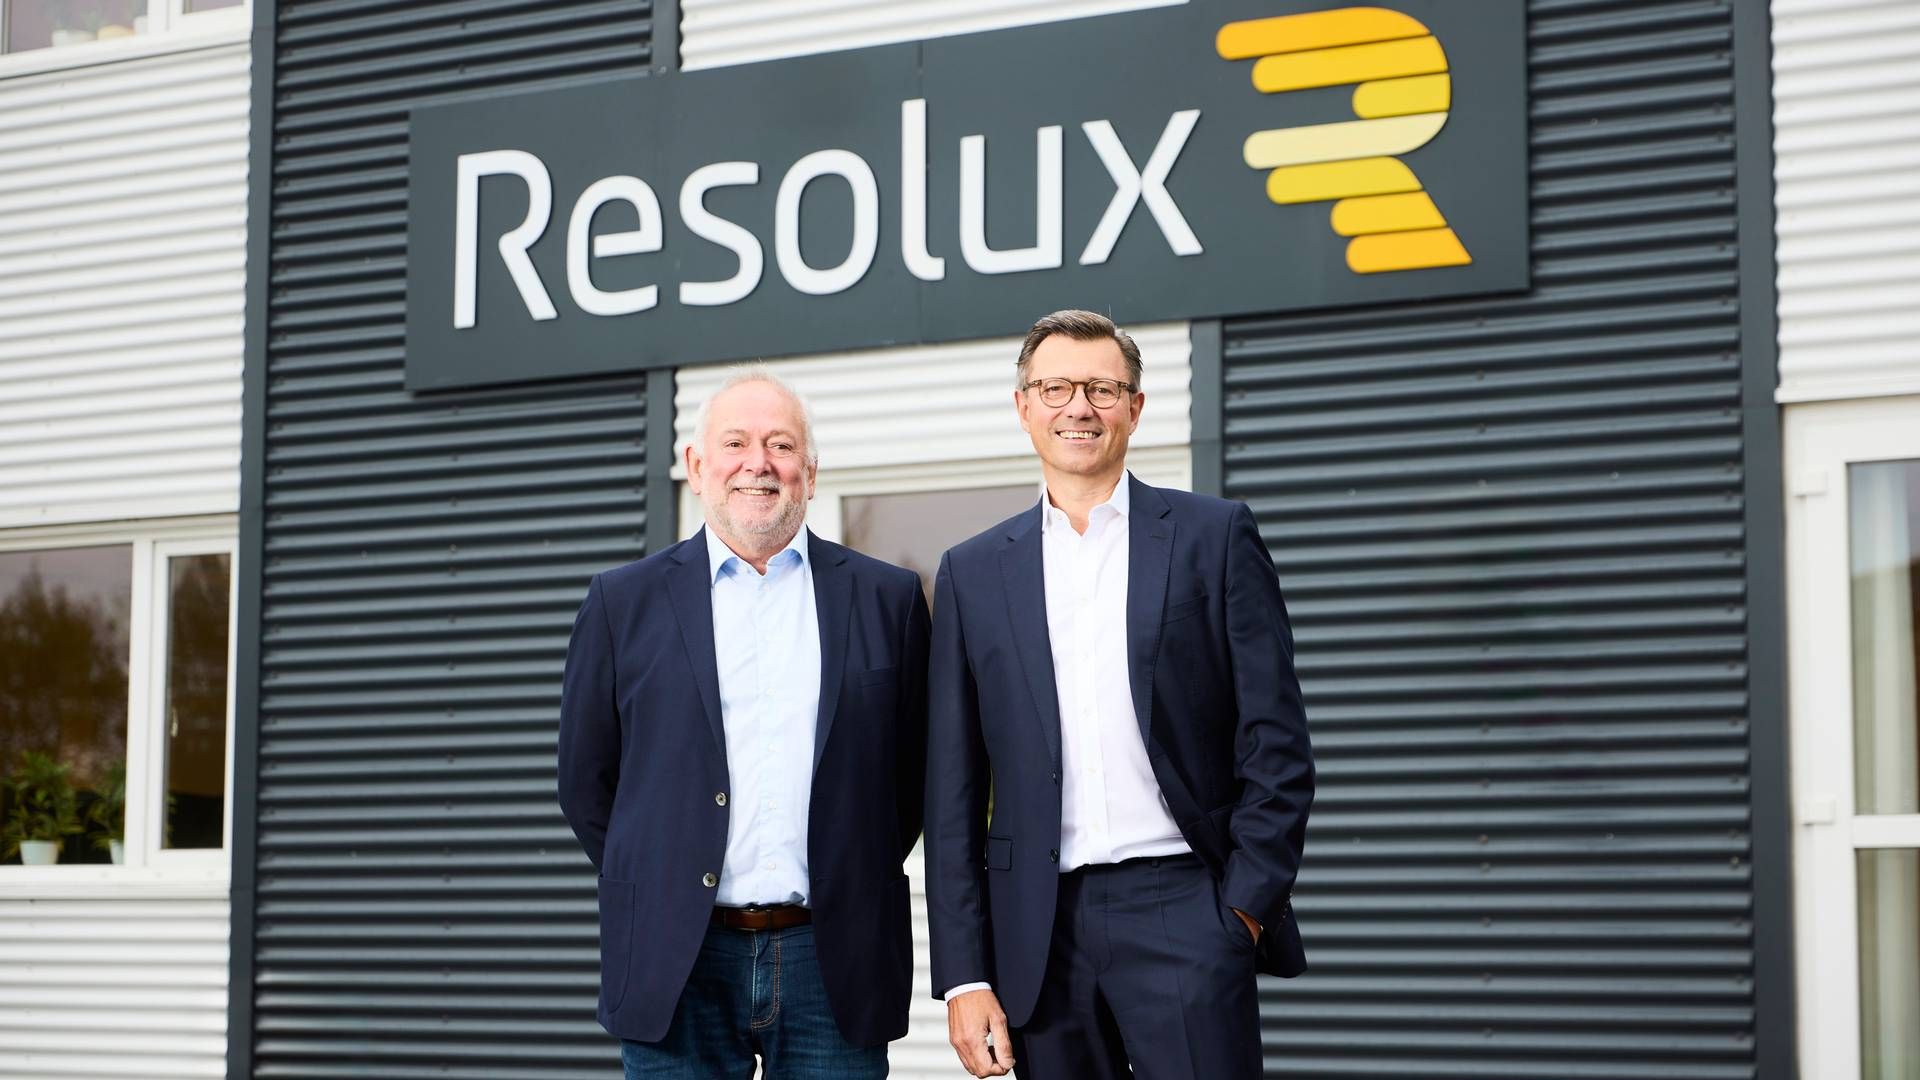 ”I see great potential for Resolux’s services, even though the wind turbine industry is currently under pressure," says the new chief exec. | Photo: Pr Resolux